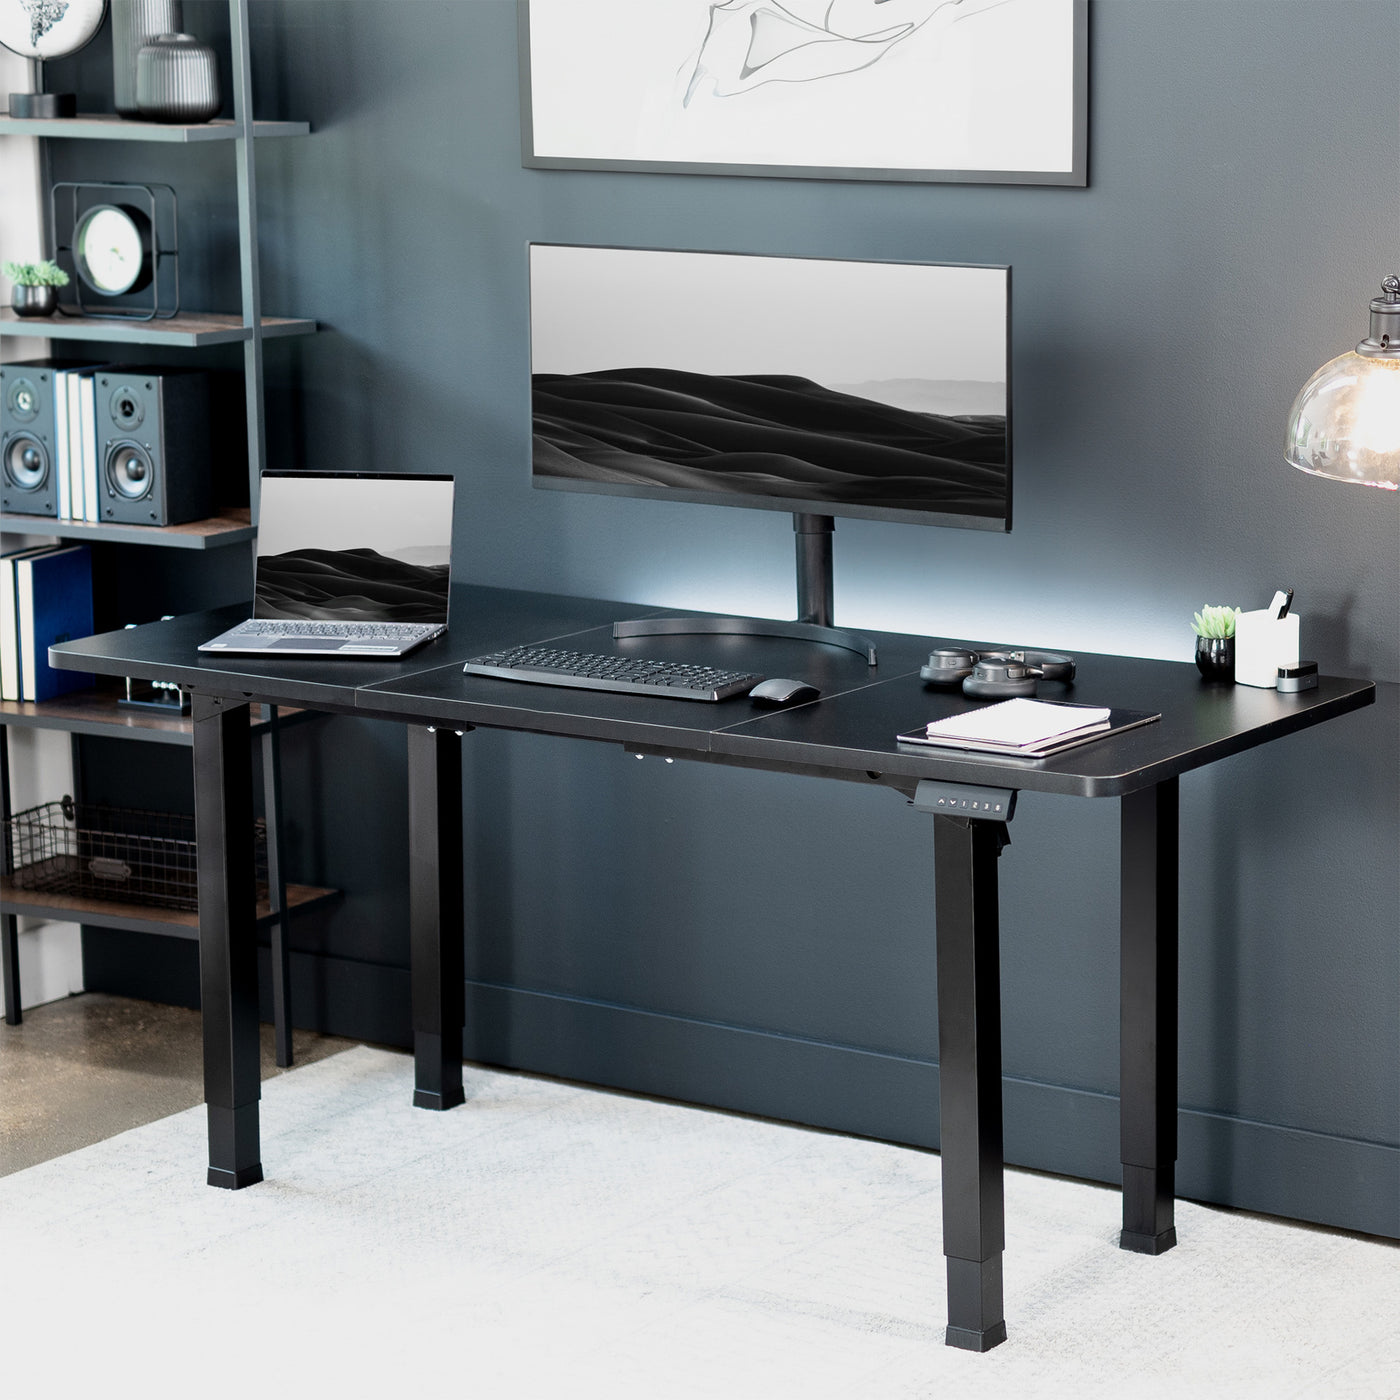 Sturdy electric desk frame with heavy-duty 4-leg design. Height adjustment with 3-setting memory controller, and frame width adjustment to personalize your workstation.